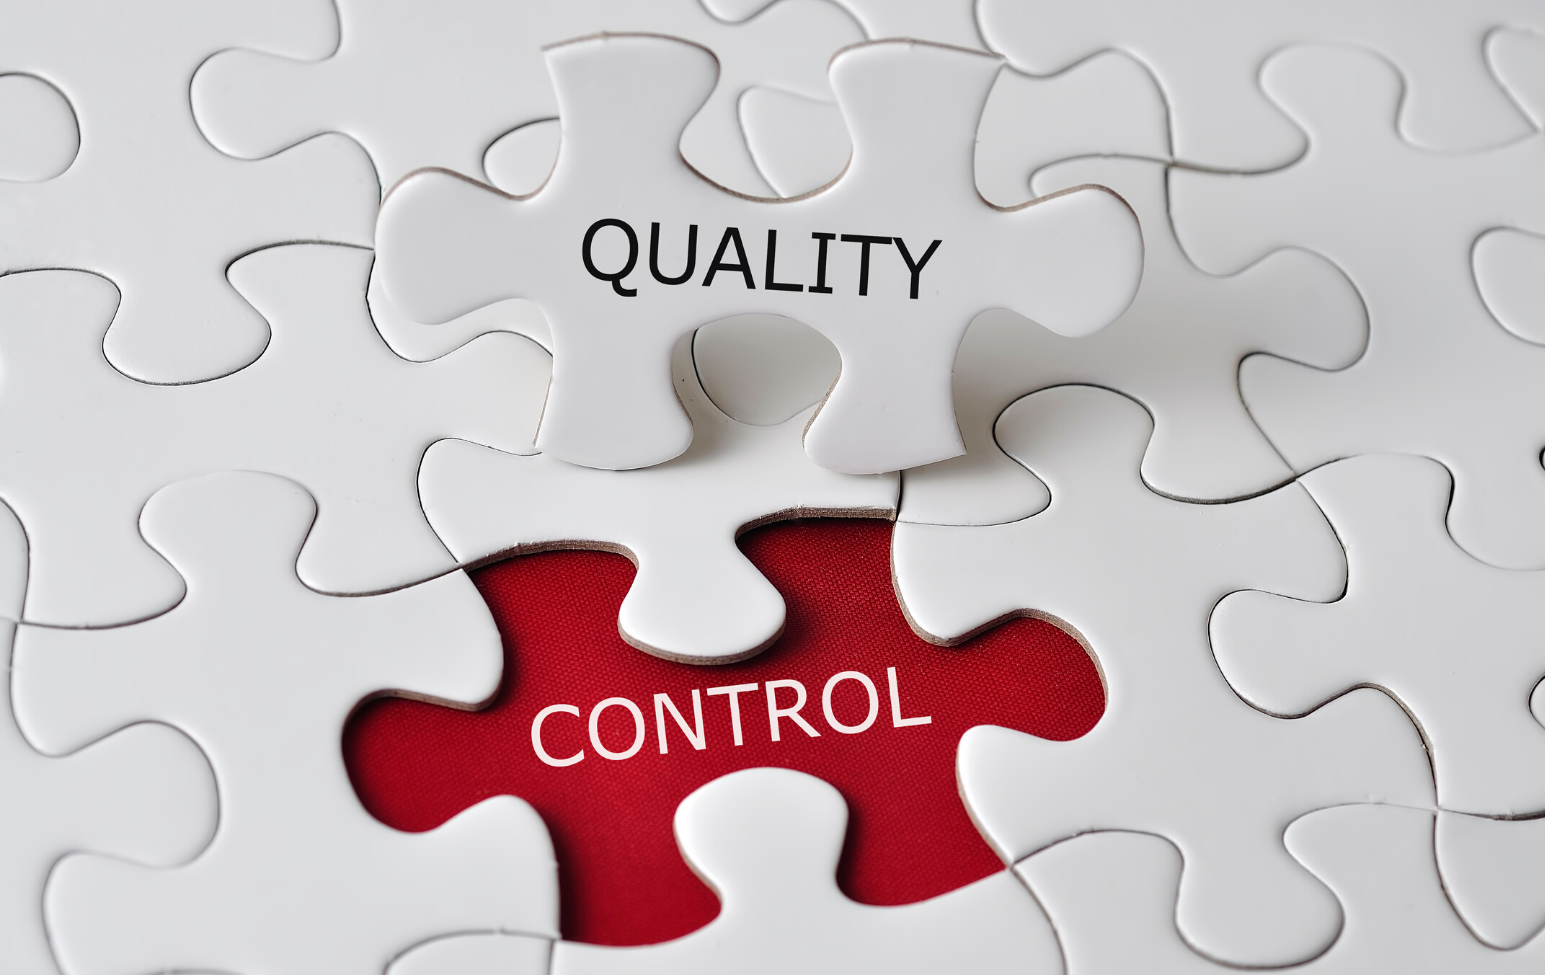 Quality Control - Project Management